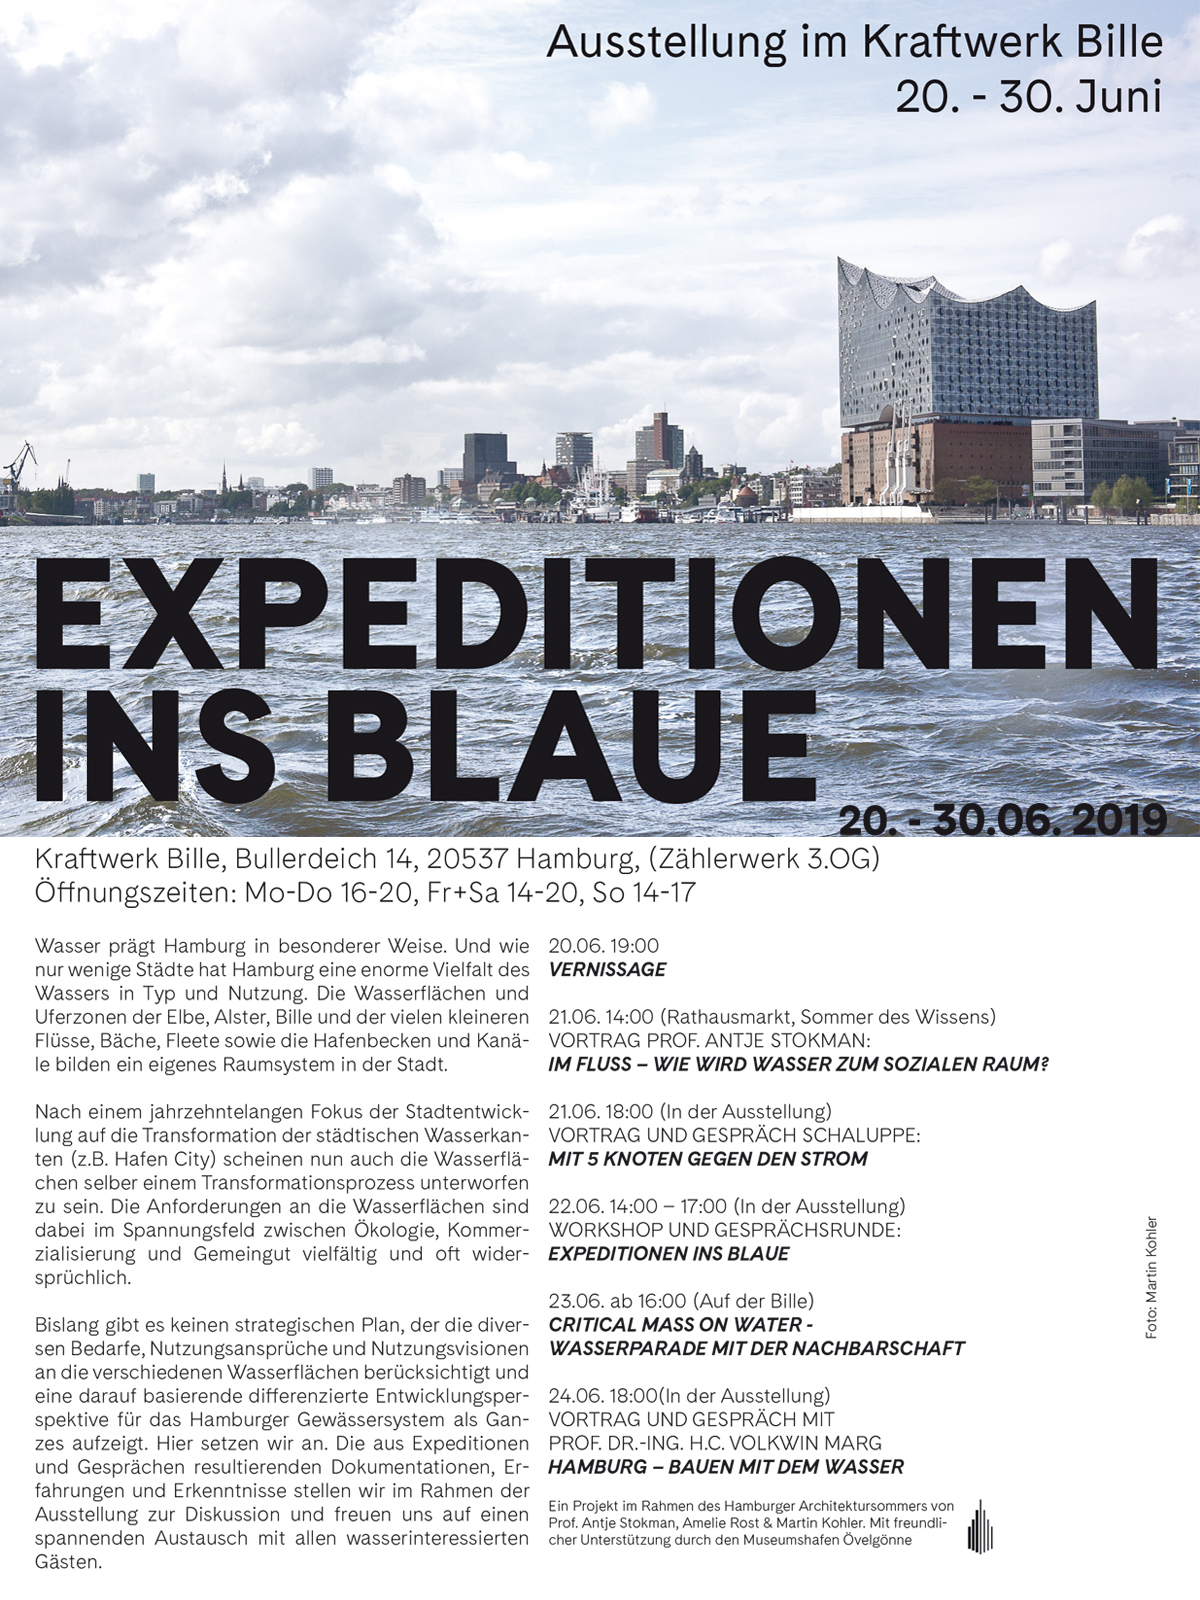  Interactive Exhibition 'Expeditions into the Blue' | Amelie Rost